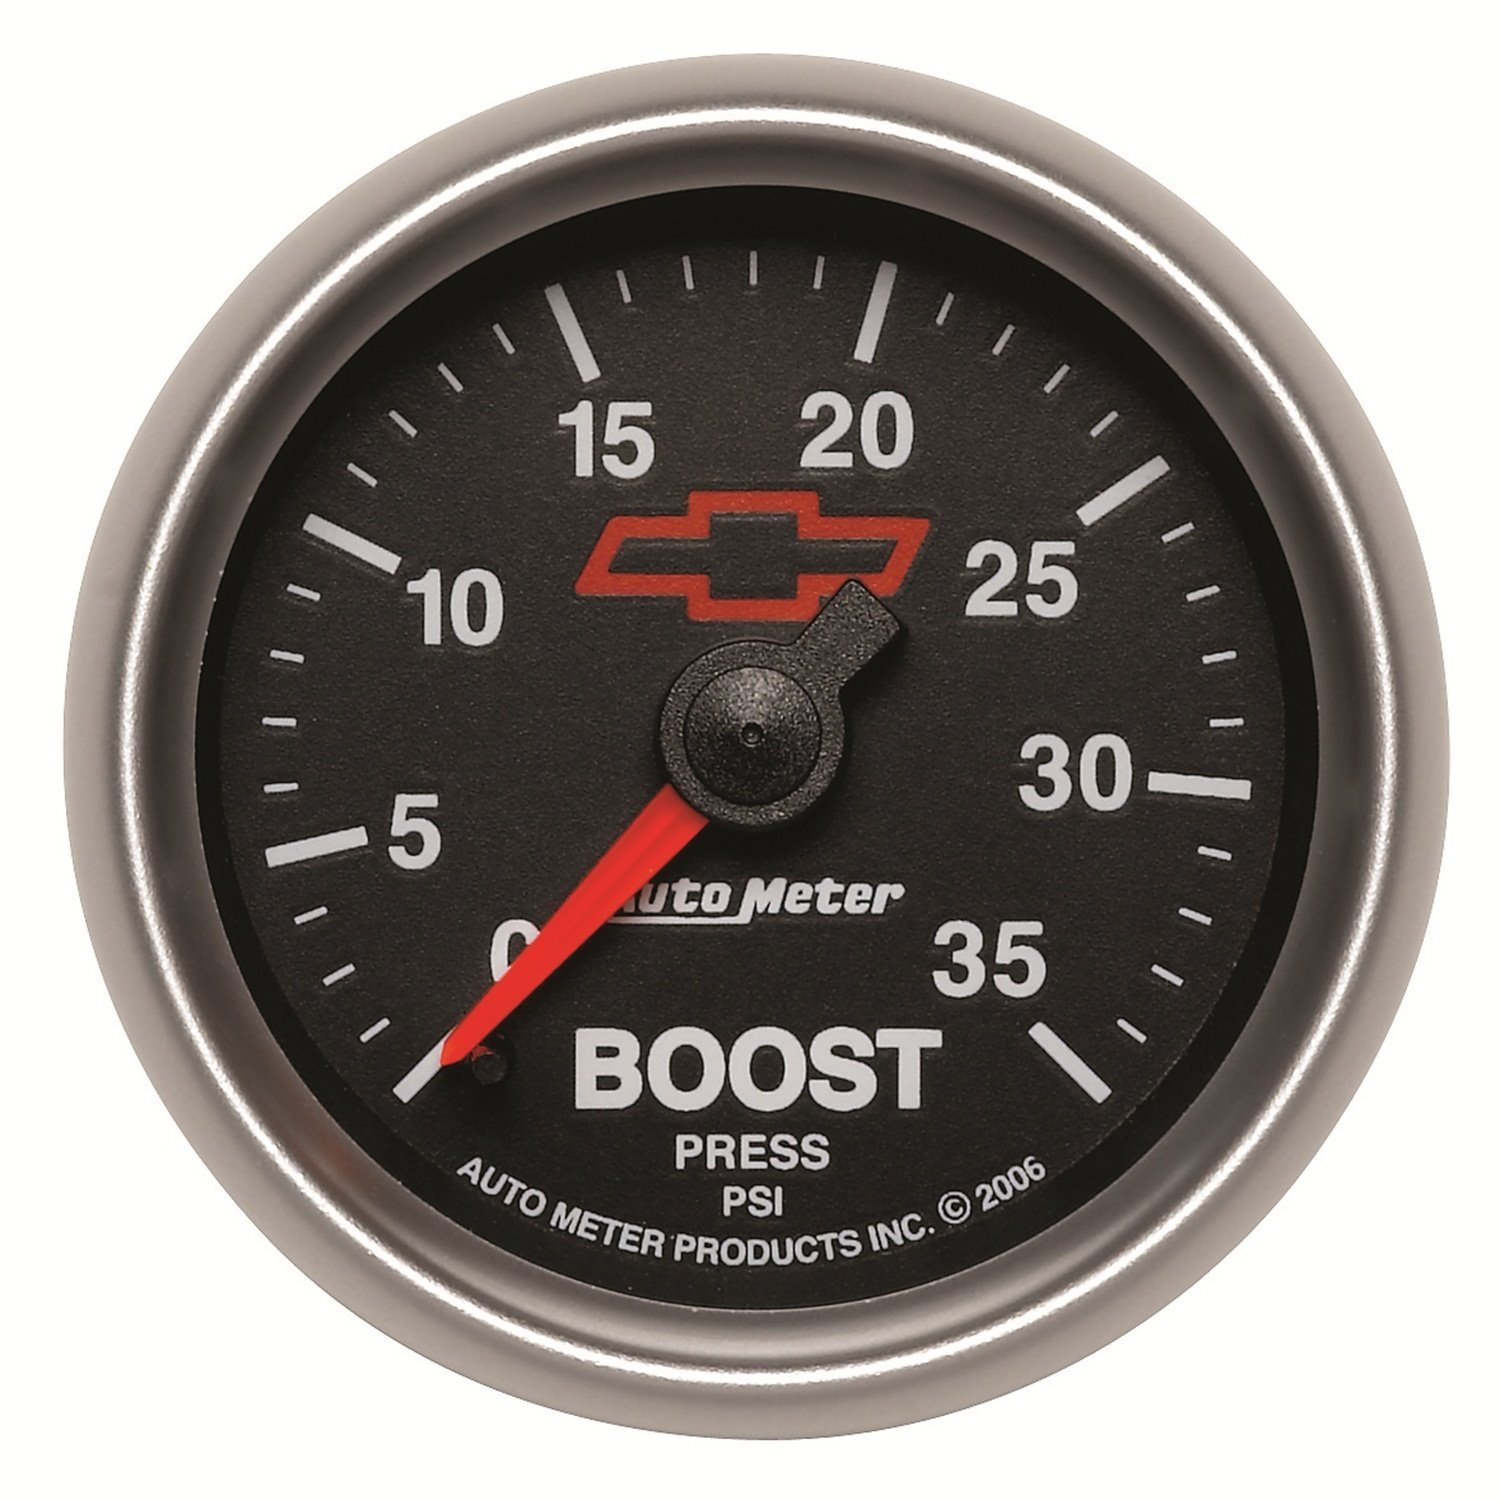 Officially Licensed Chevrolet Performance Boost Gauge 2-1/16